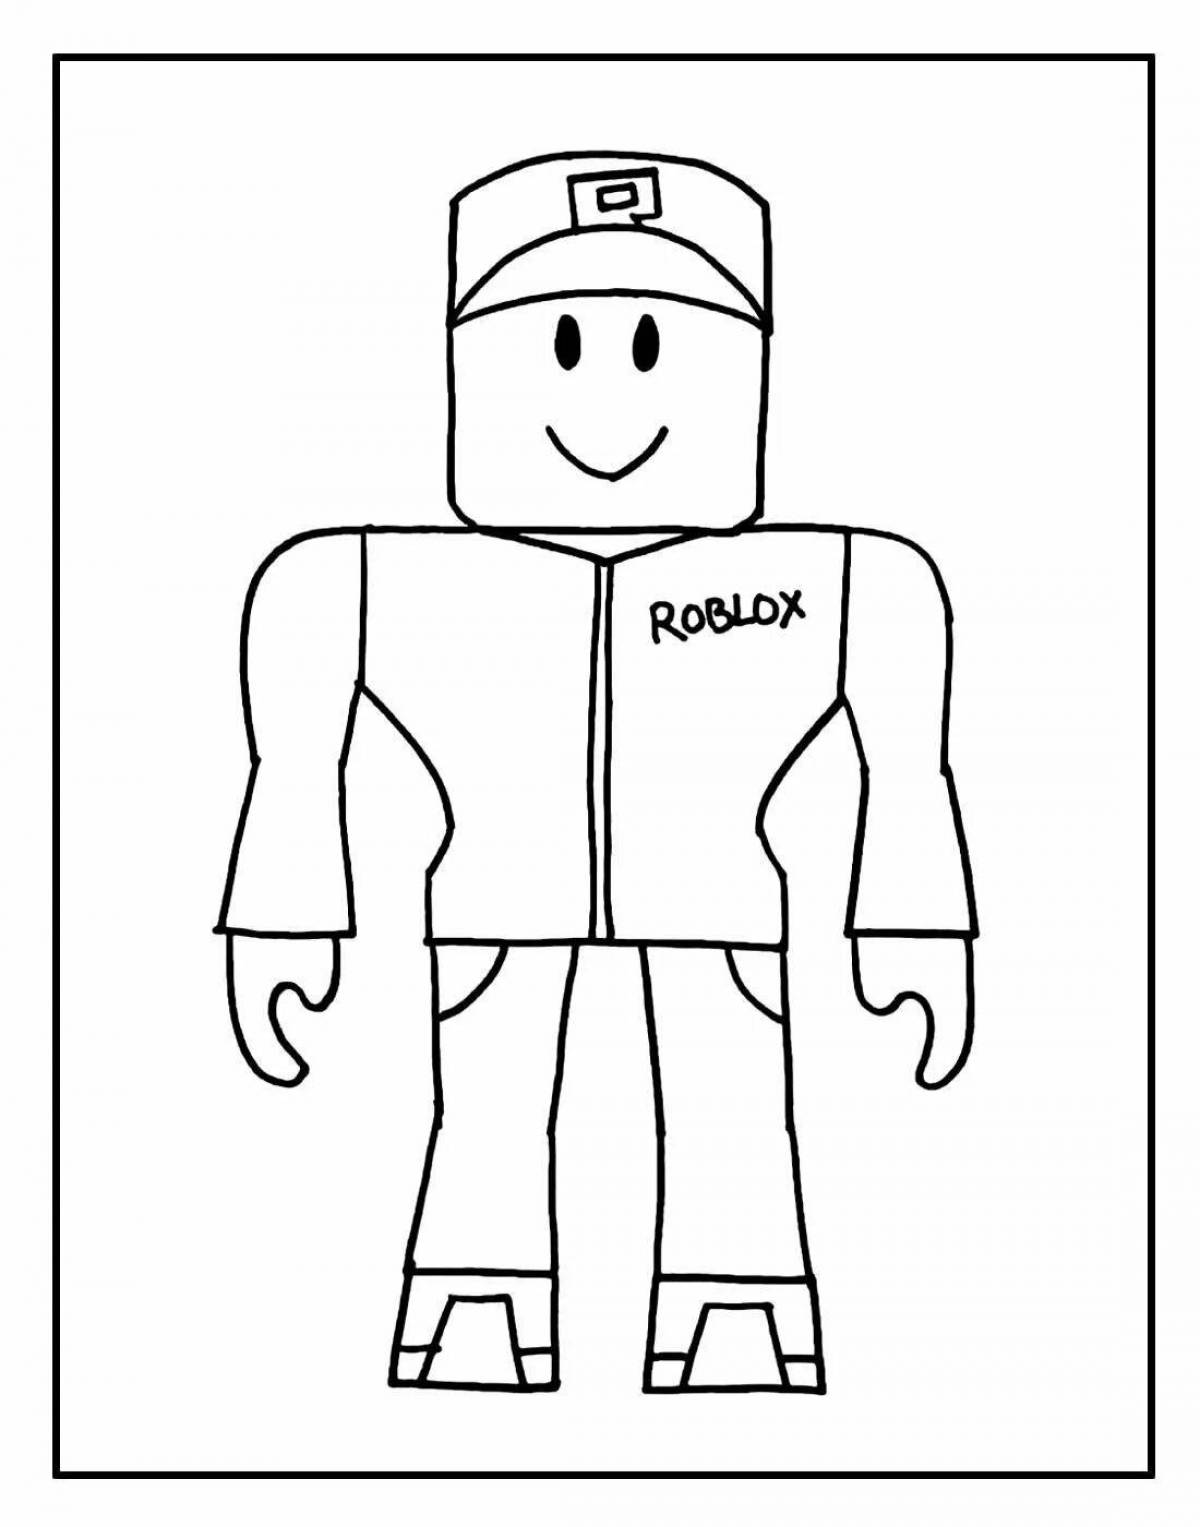 Color-lush roblox player coloring page